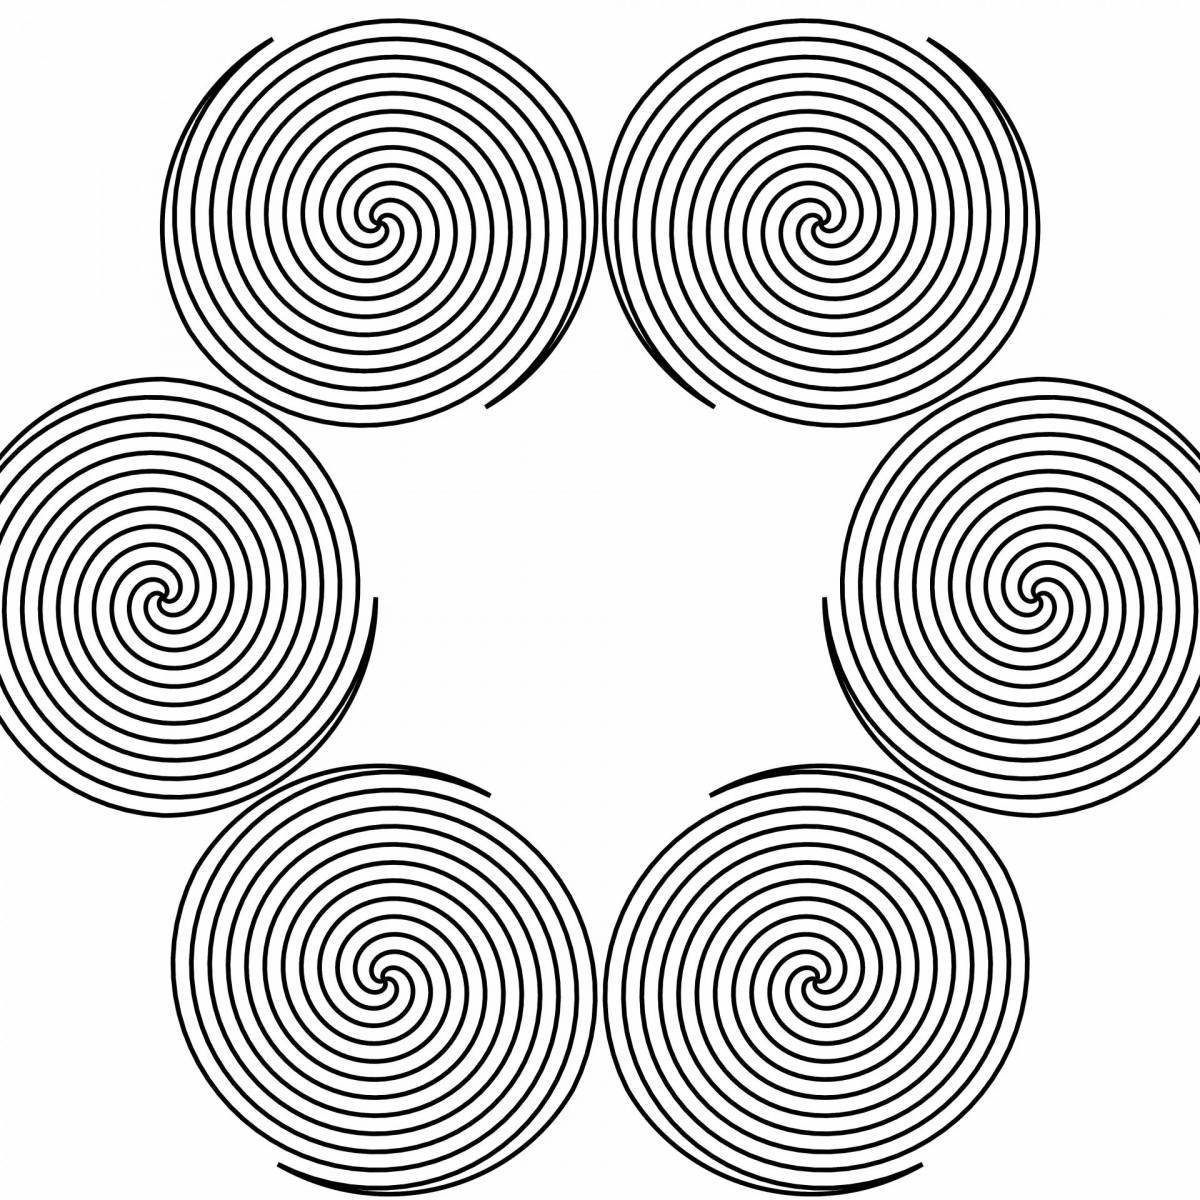 Coloring page with dynamic striped circle